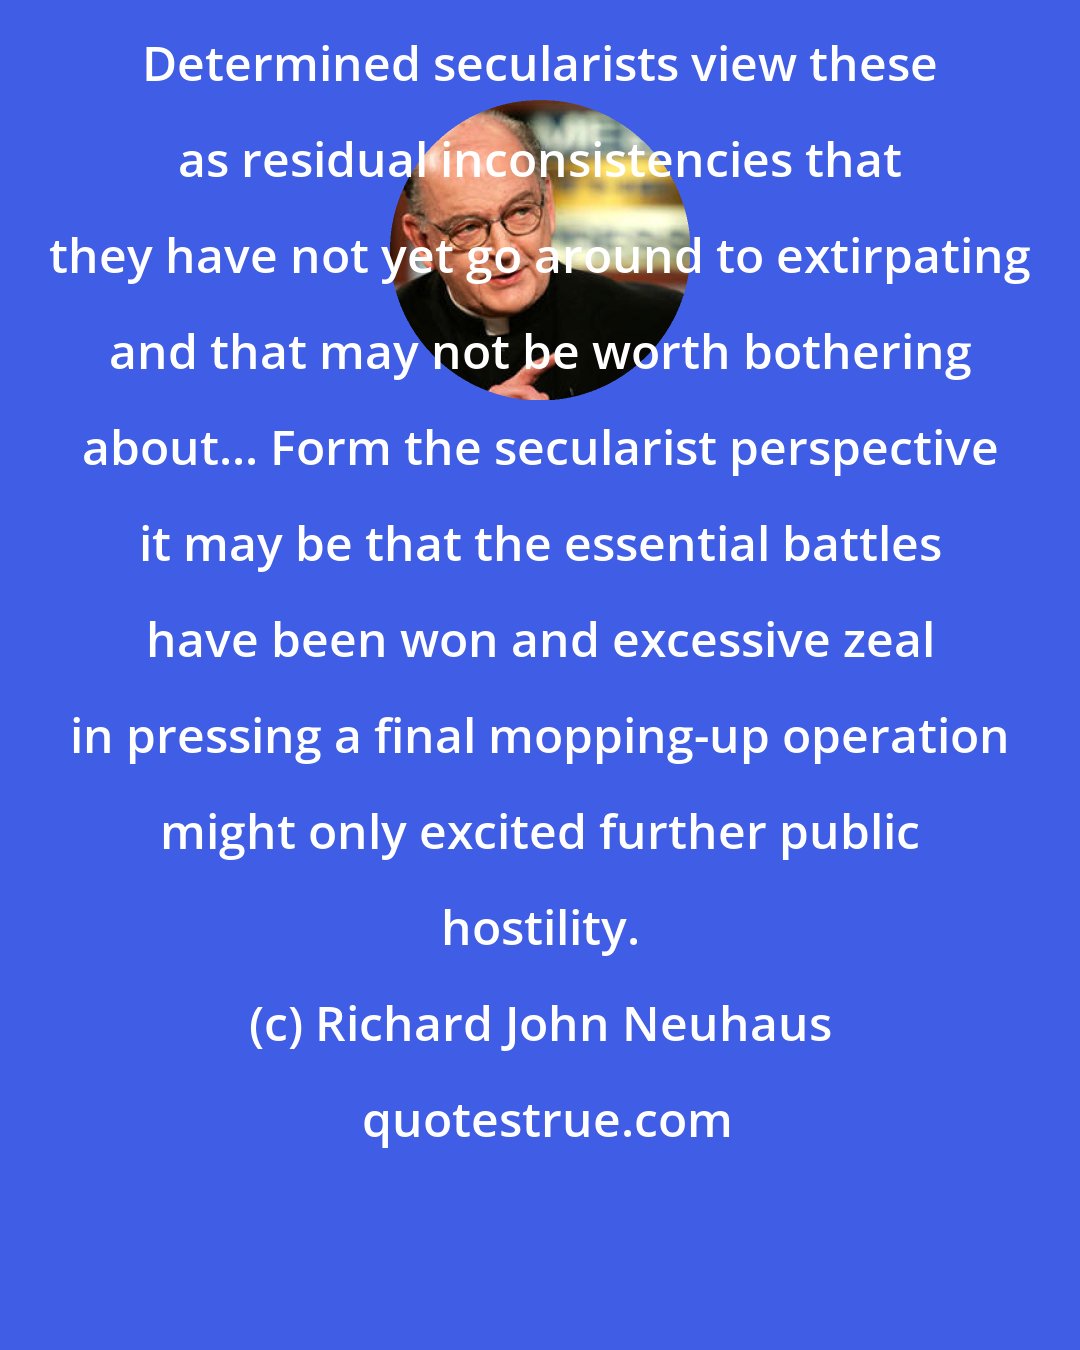 Richard John Neuhaus: Determined secularists view these as residual inconsistencies that they have not yet go around to extirpating and that may not be worth bothering about... Form the secularist perspective it may be that the essential battles have been won and excessive zeal in pressing a final mopping-up operation might only excited further public hostility.